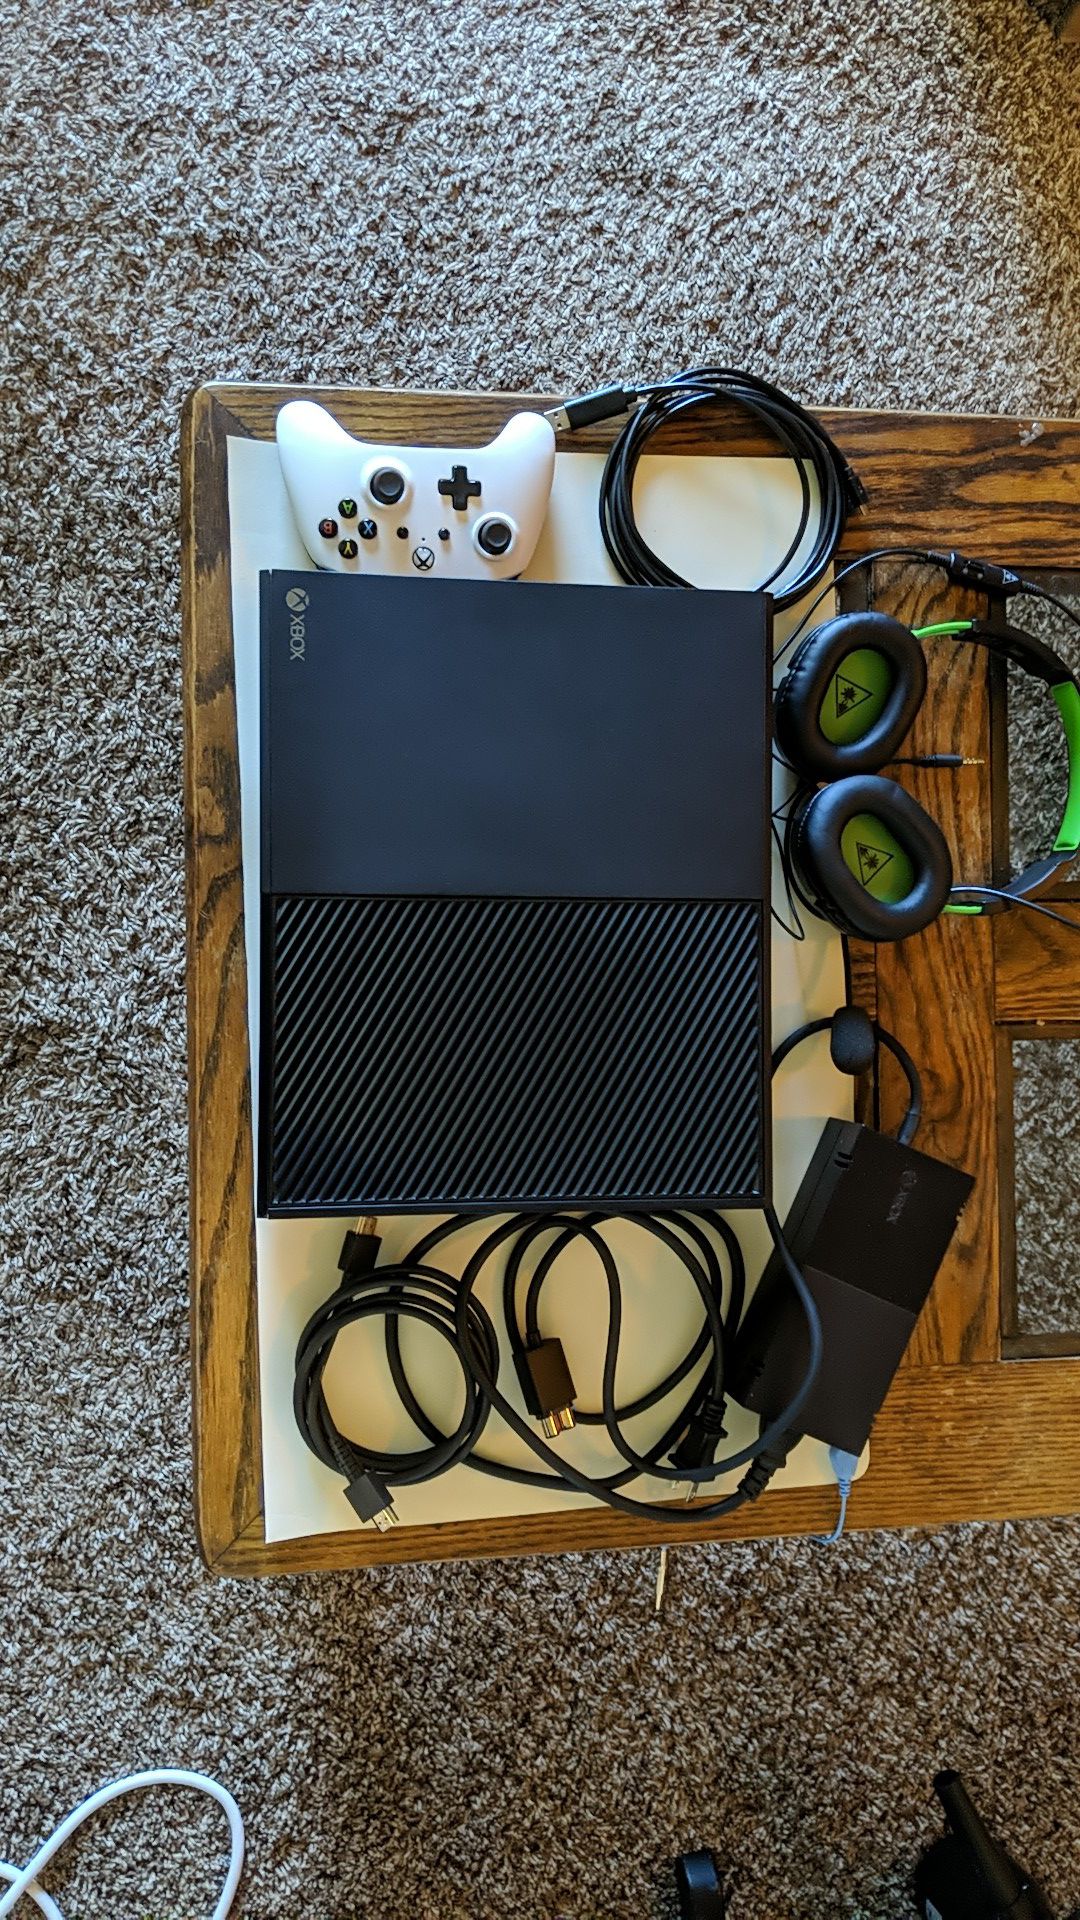 Xbox One 1tb console, headset and games